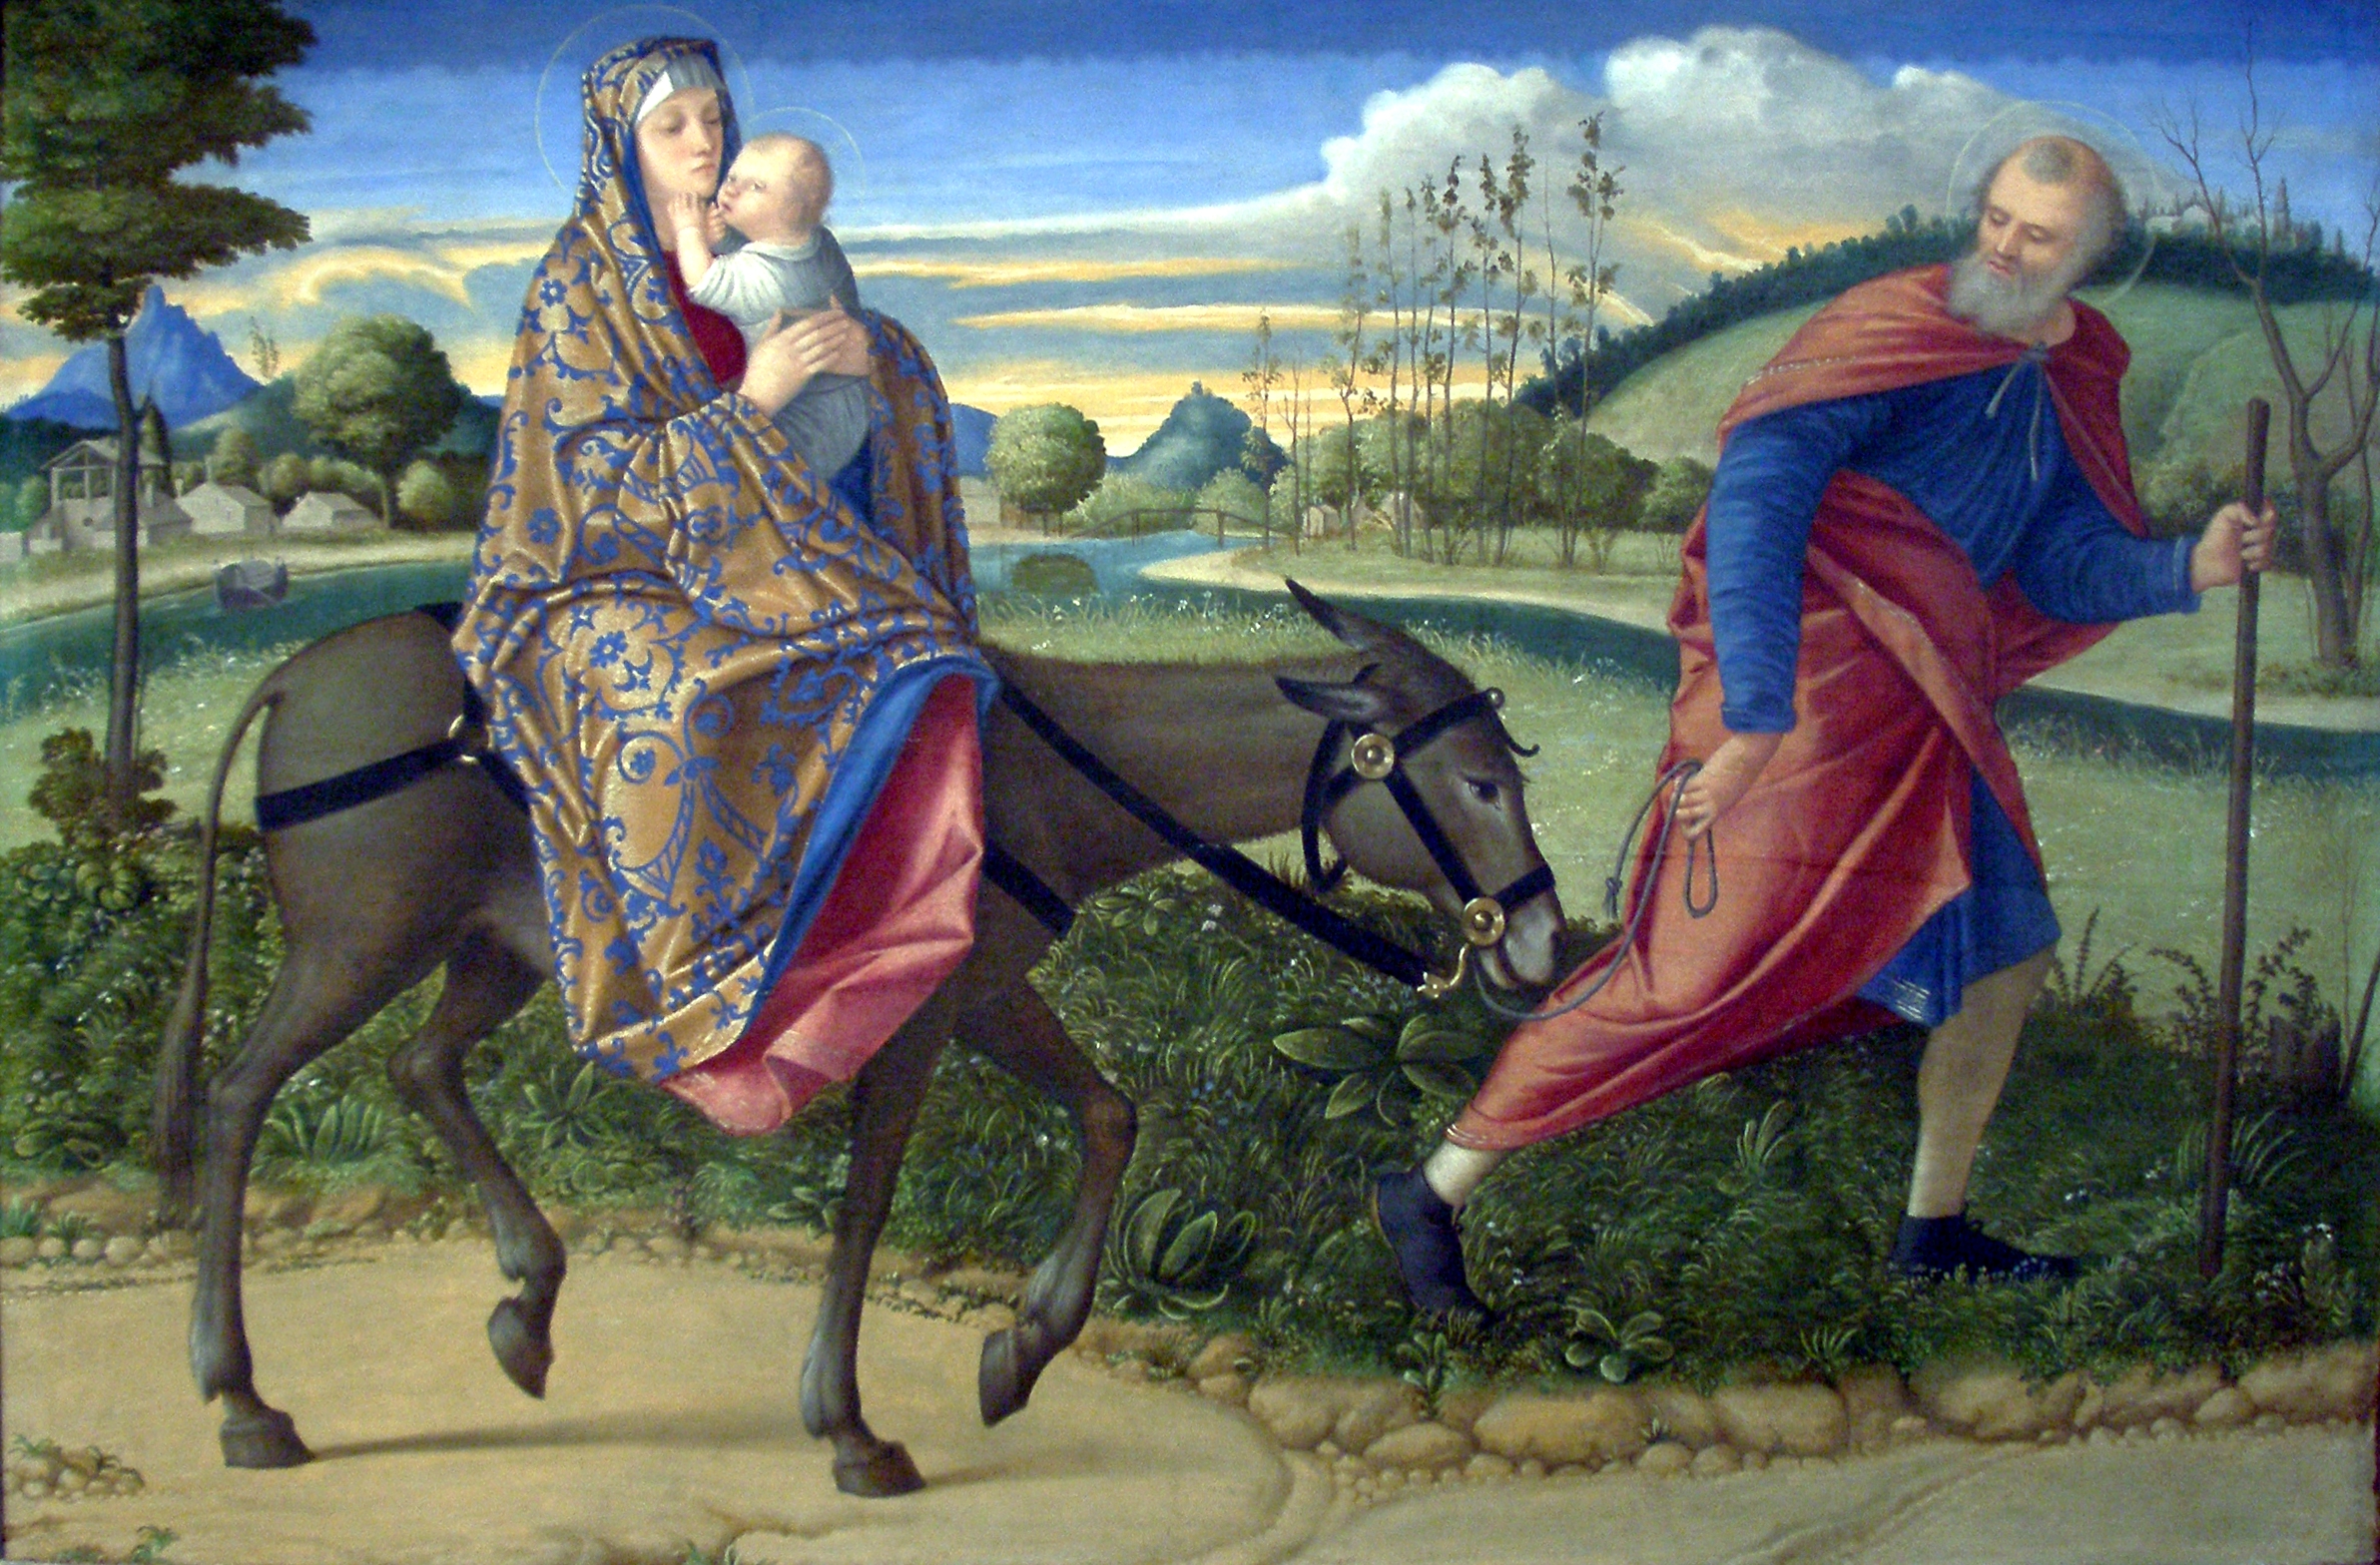 Painting by Vittore Carpaccio of the Holy Family's flight to Egypt